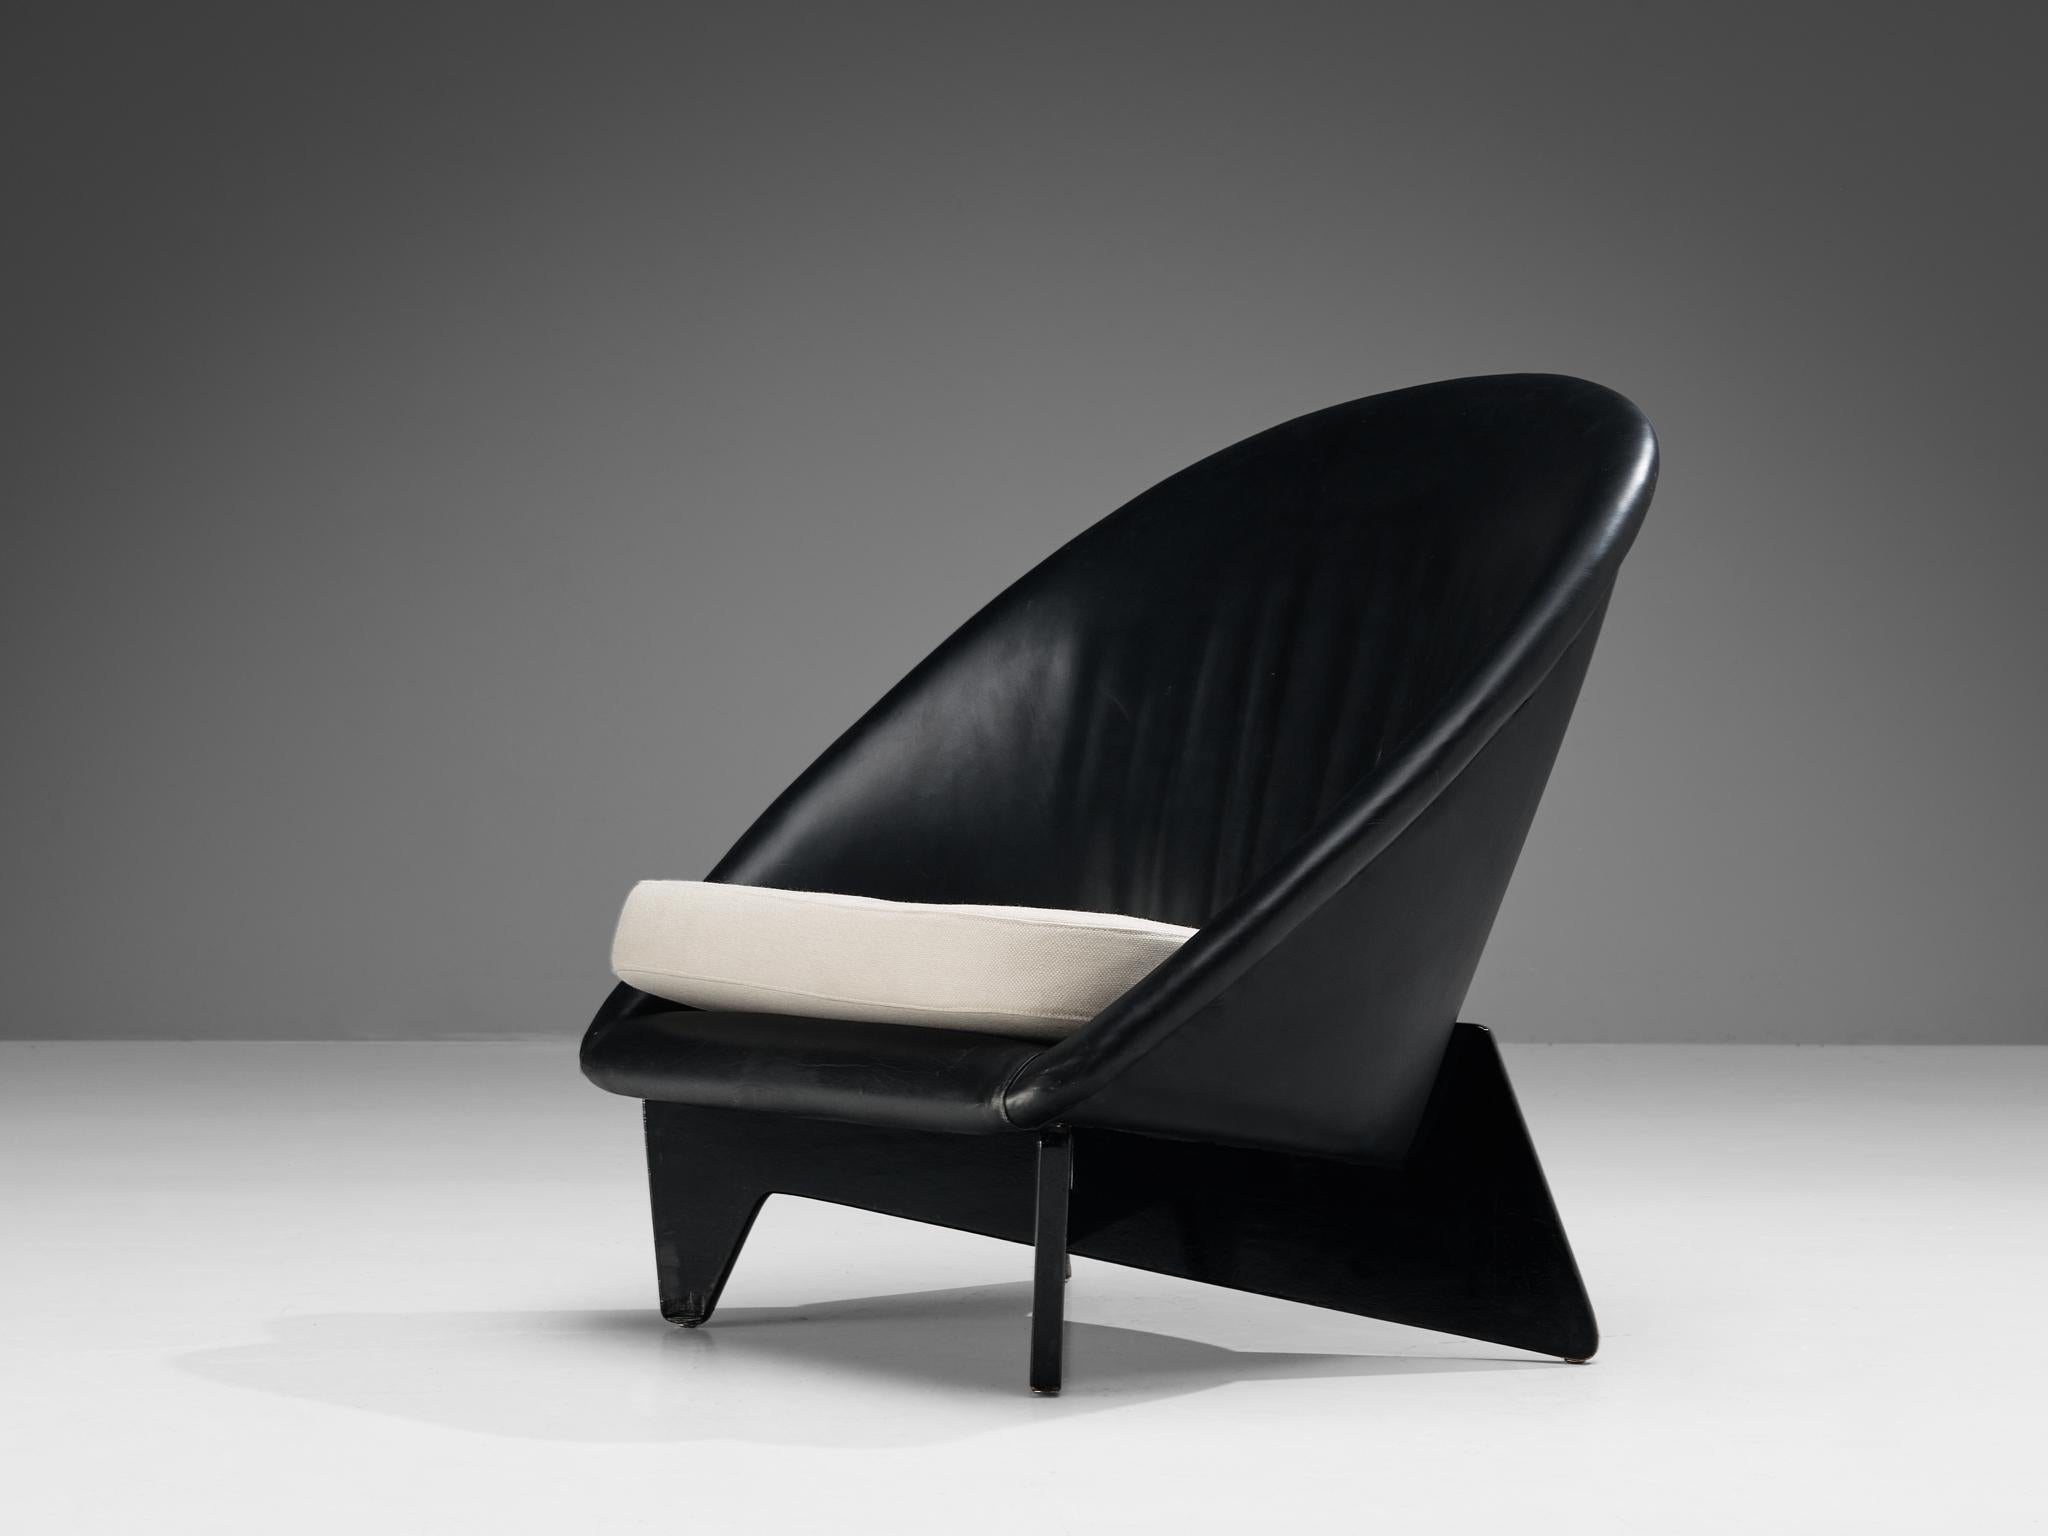 Antti Nurmesniemi for Palace Hotel, Helsinki, lounge chair, leatherette, fabric, lacquered birch, Finland, 1952 

In 1952, the distinguished Finnish designer Antti Nurmesniemi conceived this chair exclusively for the Palace Hotel, situated in the